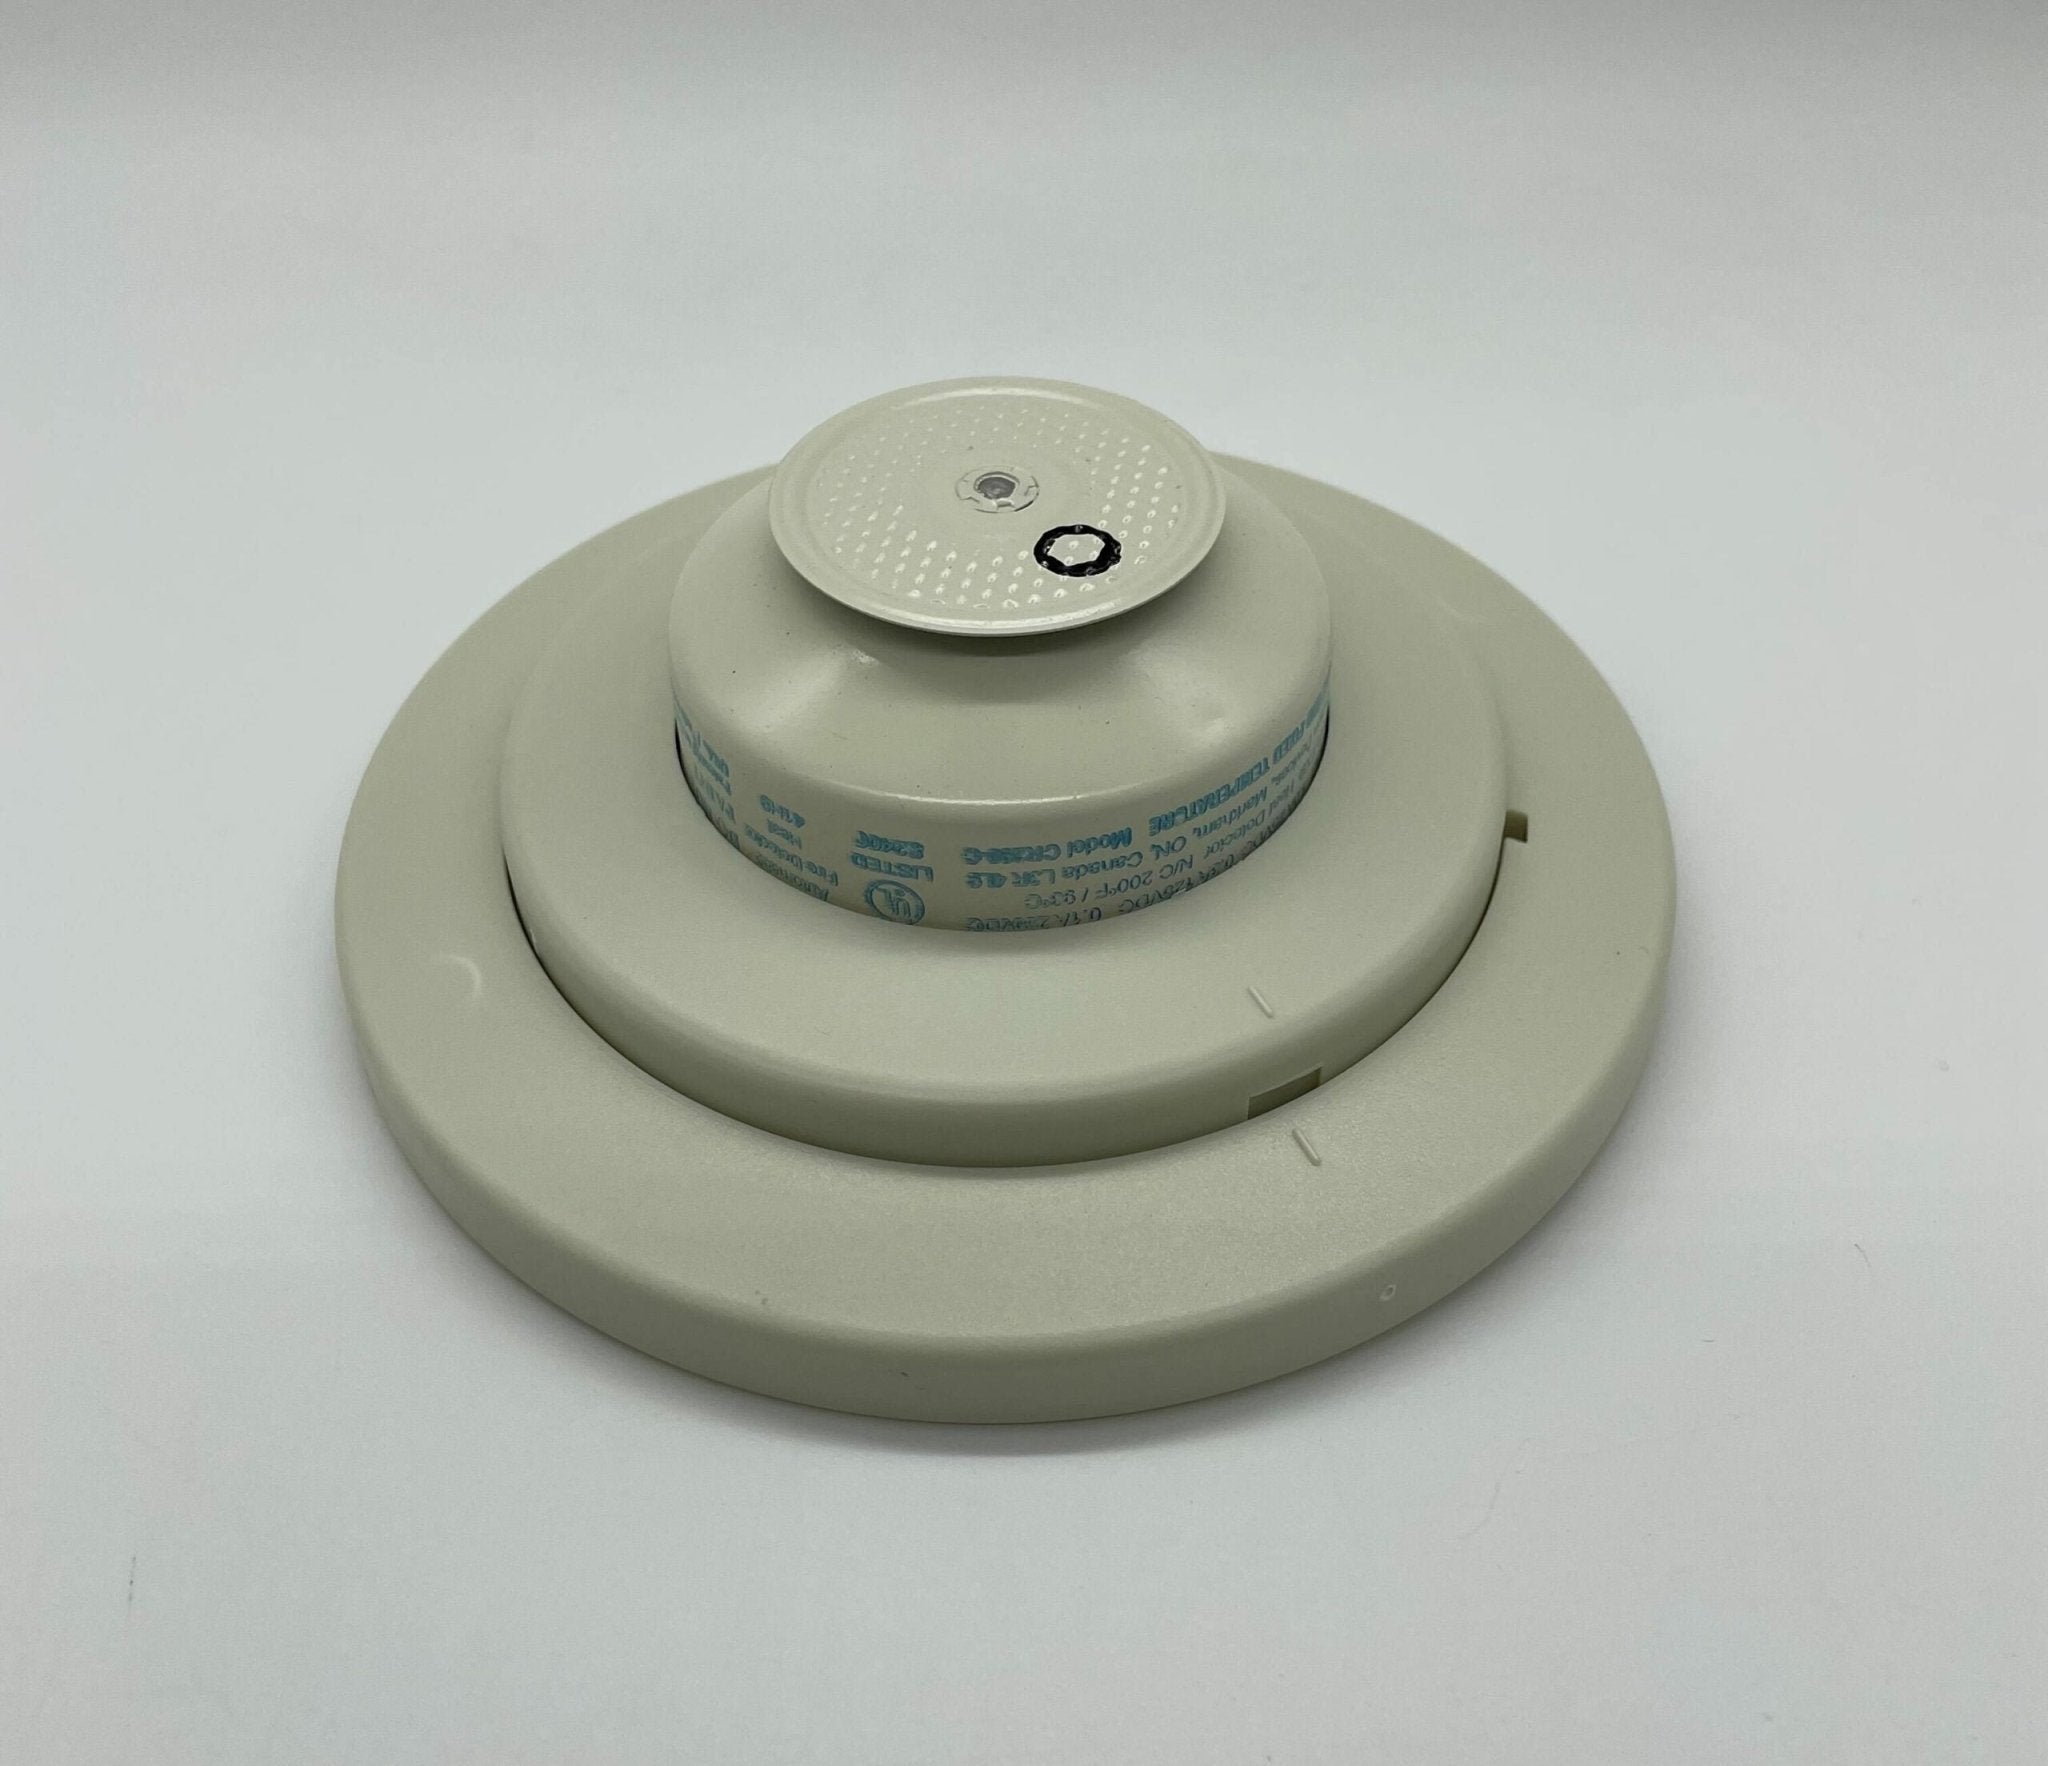 Potter CR-200-C-W - The Fire Alarm Supplier